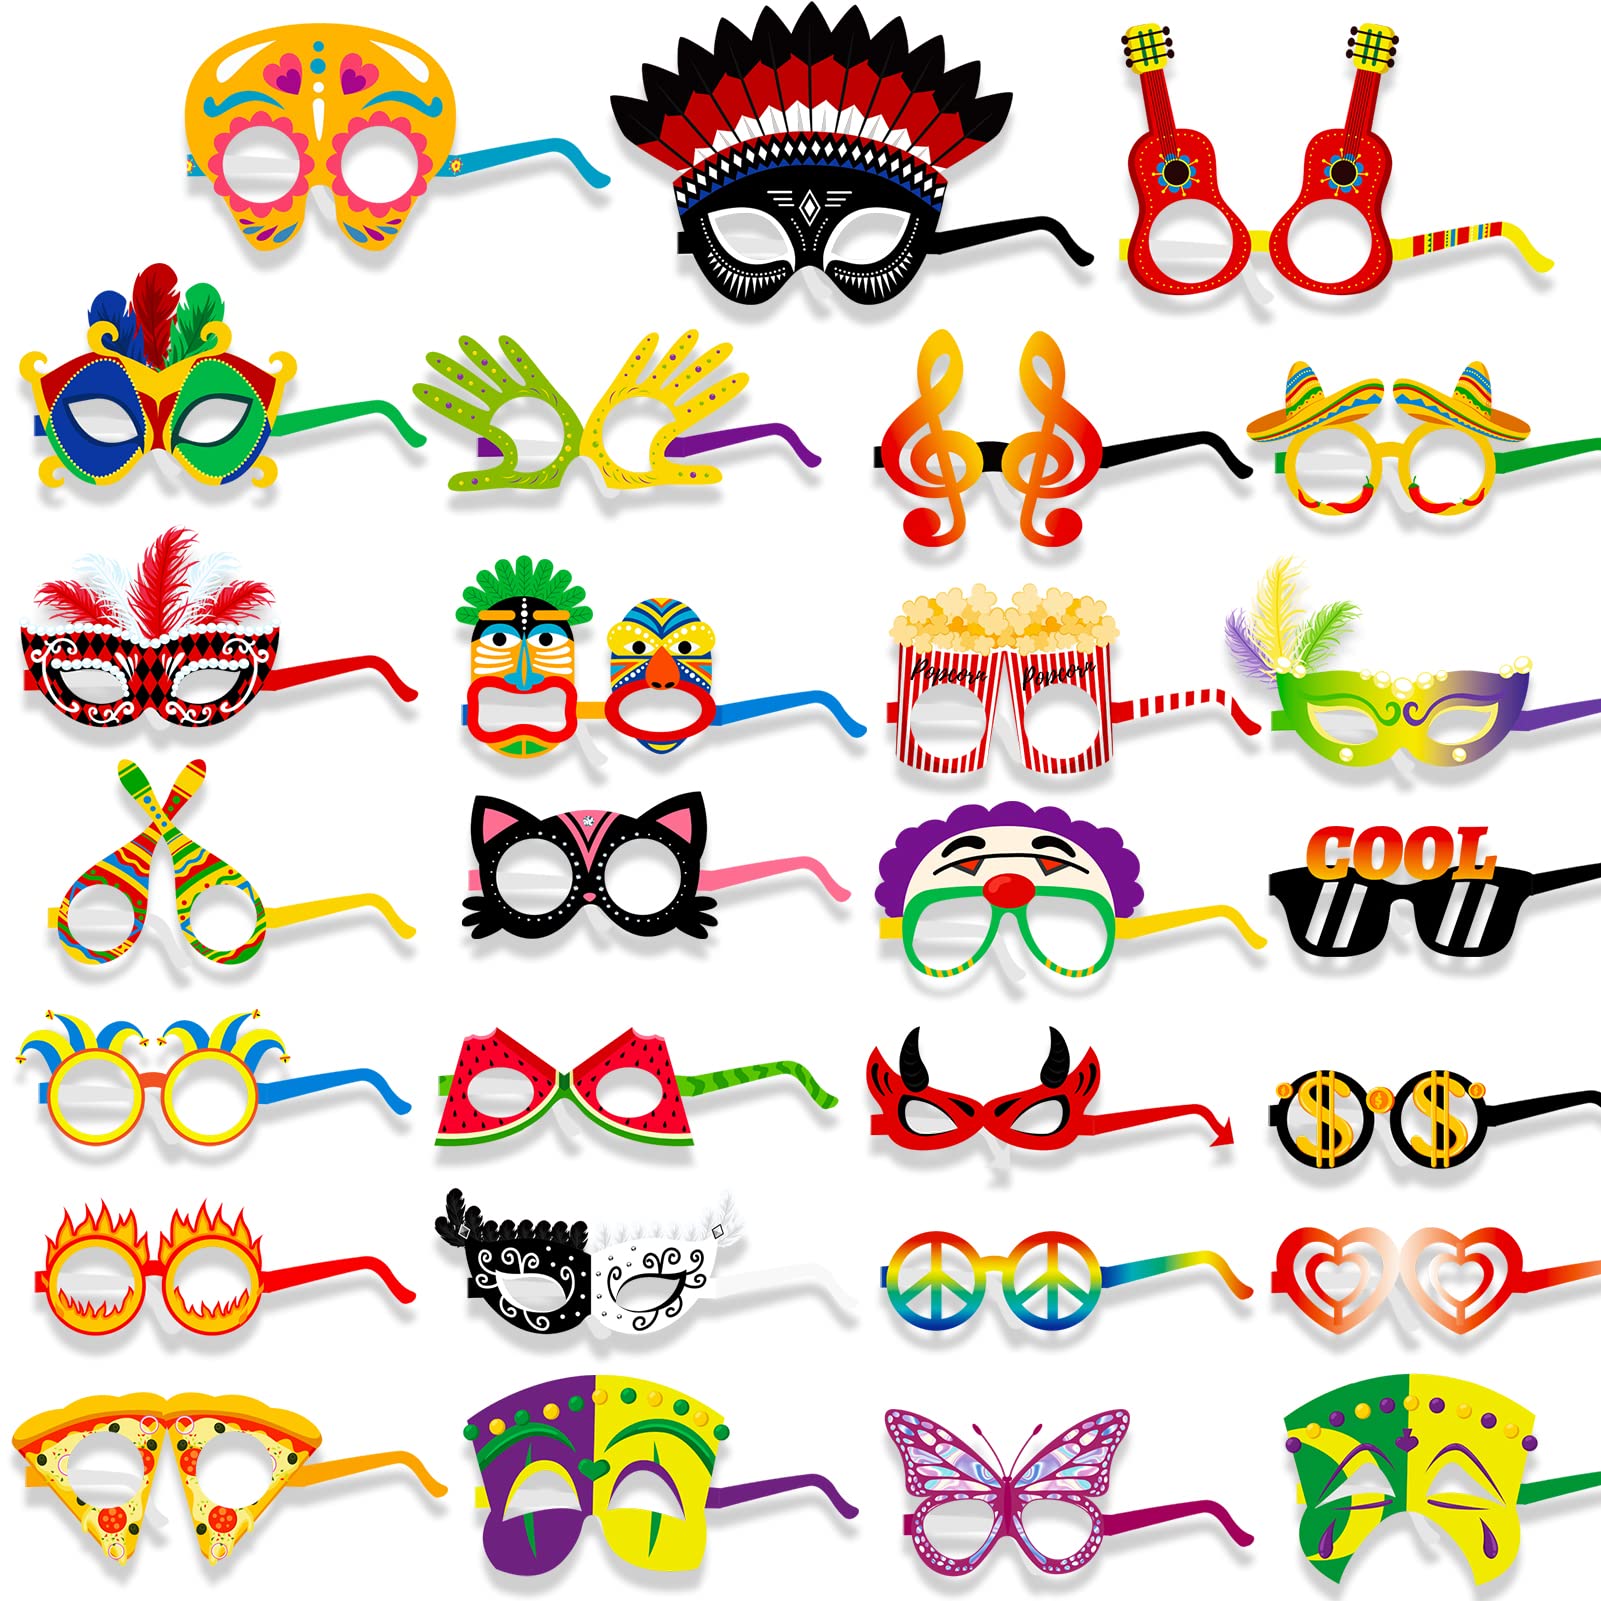 DPKOW 27pcs Novelty Carnival Party Glasses Mask, Paper Party Eyeglasses for Halloween Carnival Costume Accessories, Parade Mexic